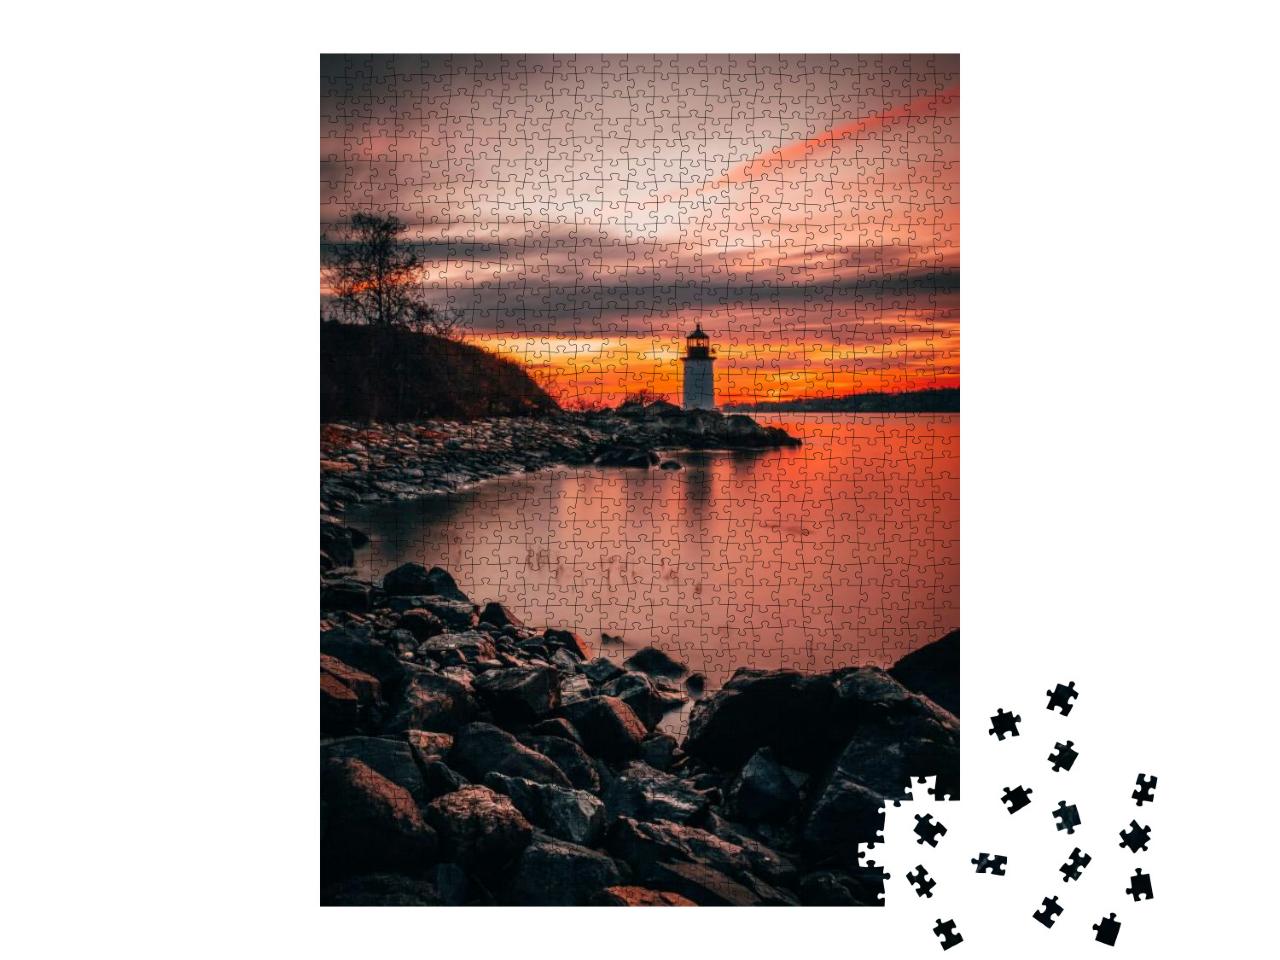 Fort Pickering Winter Island Lighthouse At Sunrise Locate... Jigsaw Puzzle with 1000 pieces